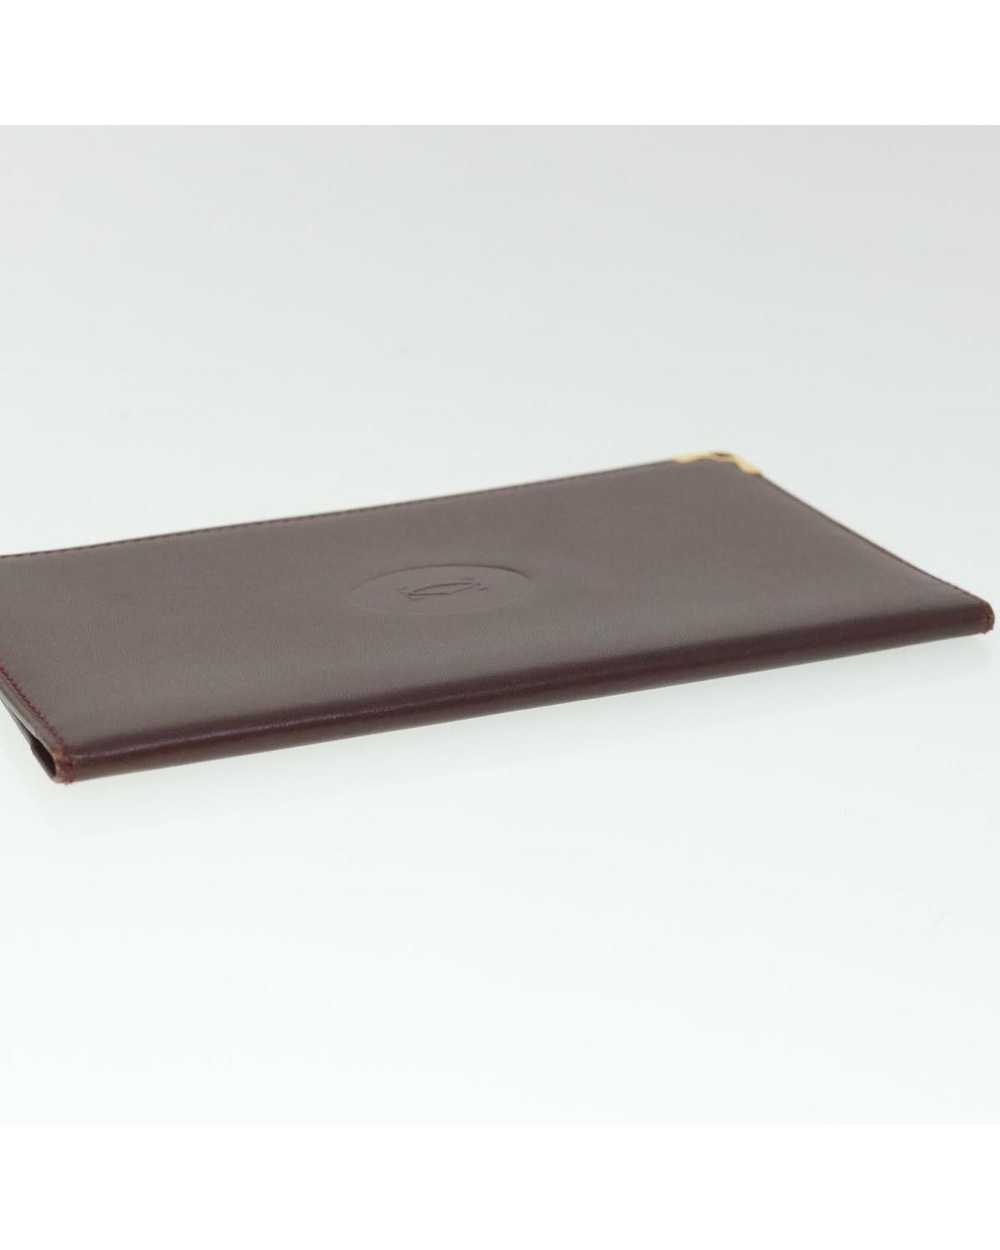 Cartier Leather Card Case in Wine Red - image 5